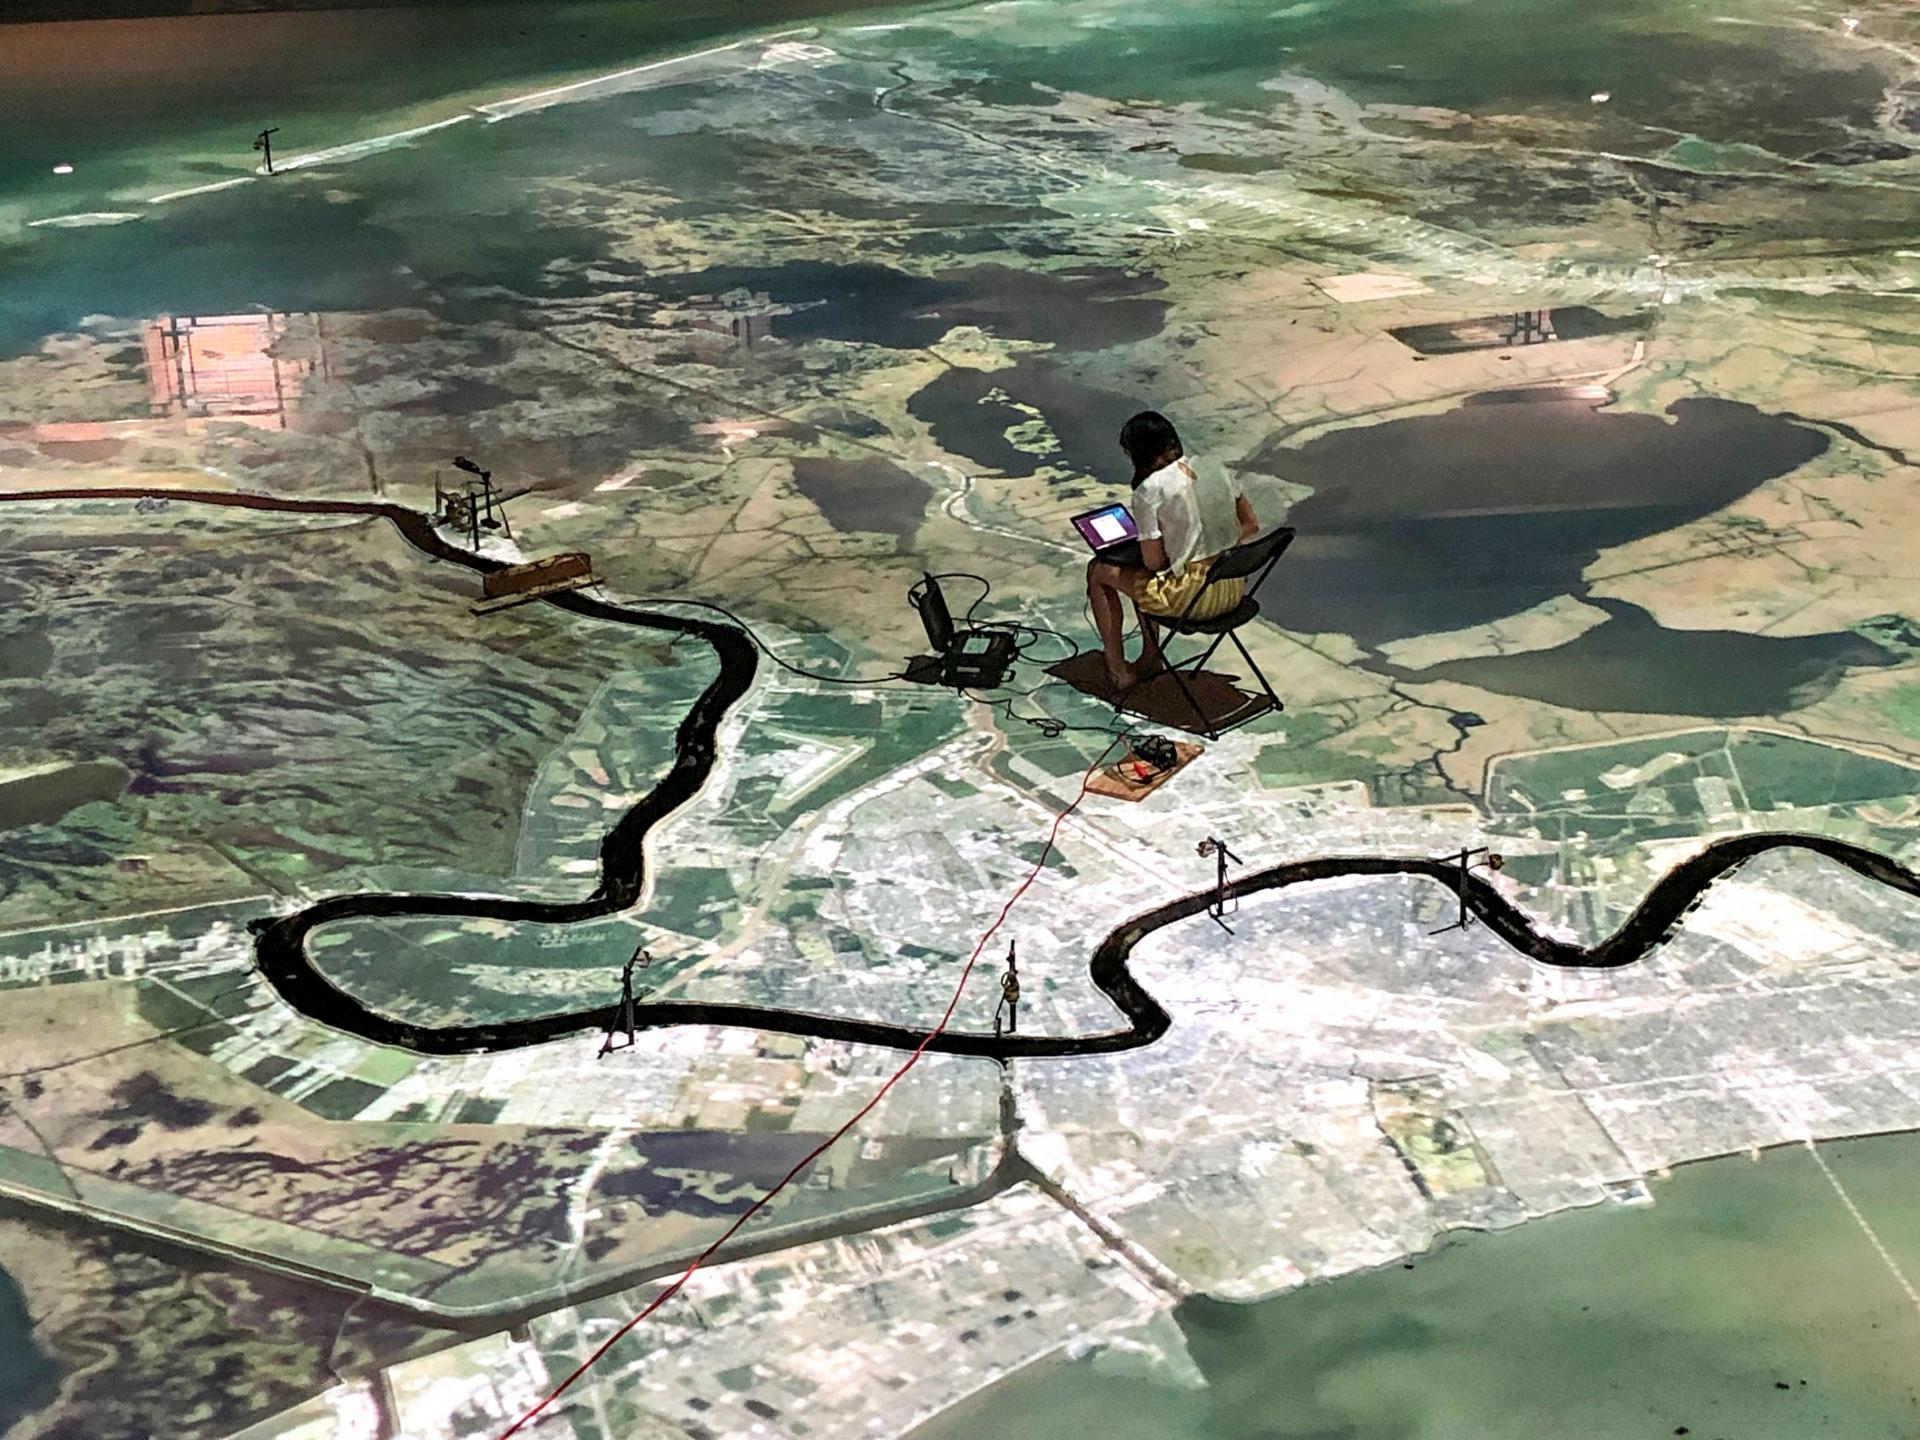 A large scale map of the Mississippi River is shown from above with a person sitting in a chair on the map.